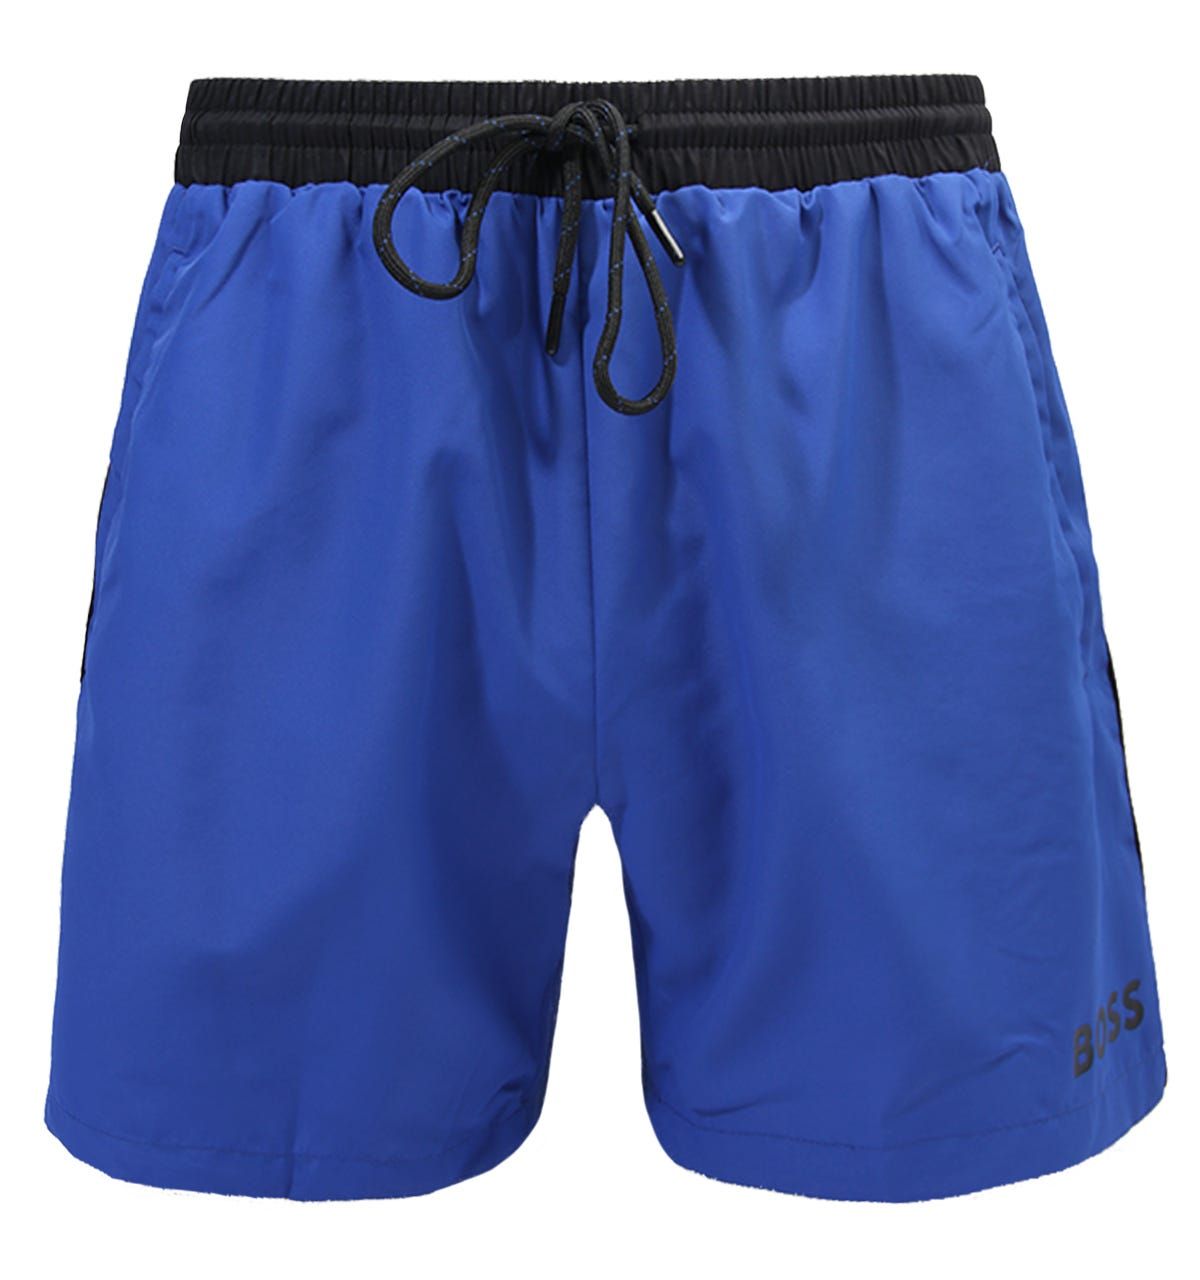 Swim in style this season with the Starfish Swim Shorts from BOSS Bodywear. These swim shorts are crafted from a quick-dry recycled synthetic fabric with a supportive mesh liner, offering optimum comfort throughout wear. Featuring a concealed drawstring waistband, front welt pockets and a single rear welt pocket. Finished with a contrast BOSS logo, on the left thigh.Regular Fit, Quick Dry Recycled Polyester , Inner Mesh Lining, Concealed Drawstring Waistband, Twin Front Welt Pockets, Rear Welt Pocket , BOSS Branding. Style & Fit:Regular Fit, Fits True to Size. Composition & Care:100% Recycled Polyester, Machine Wash.